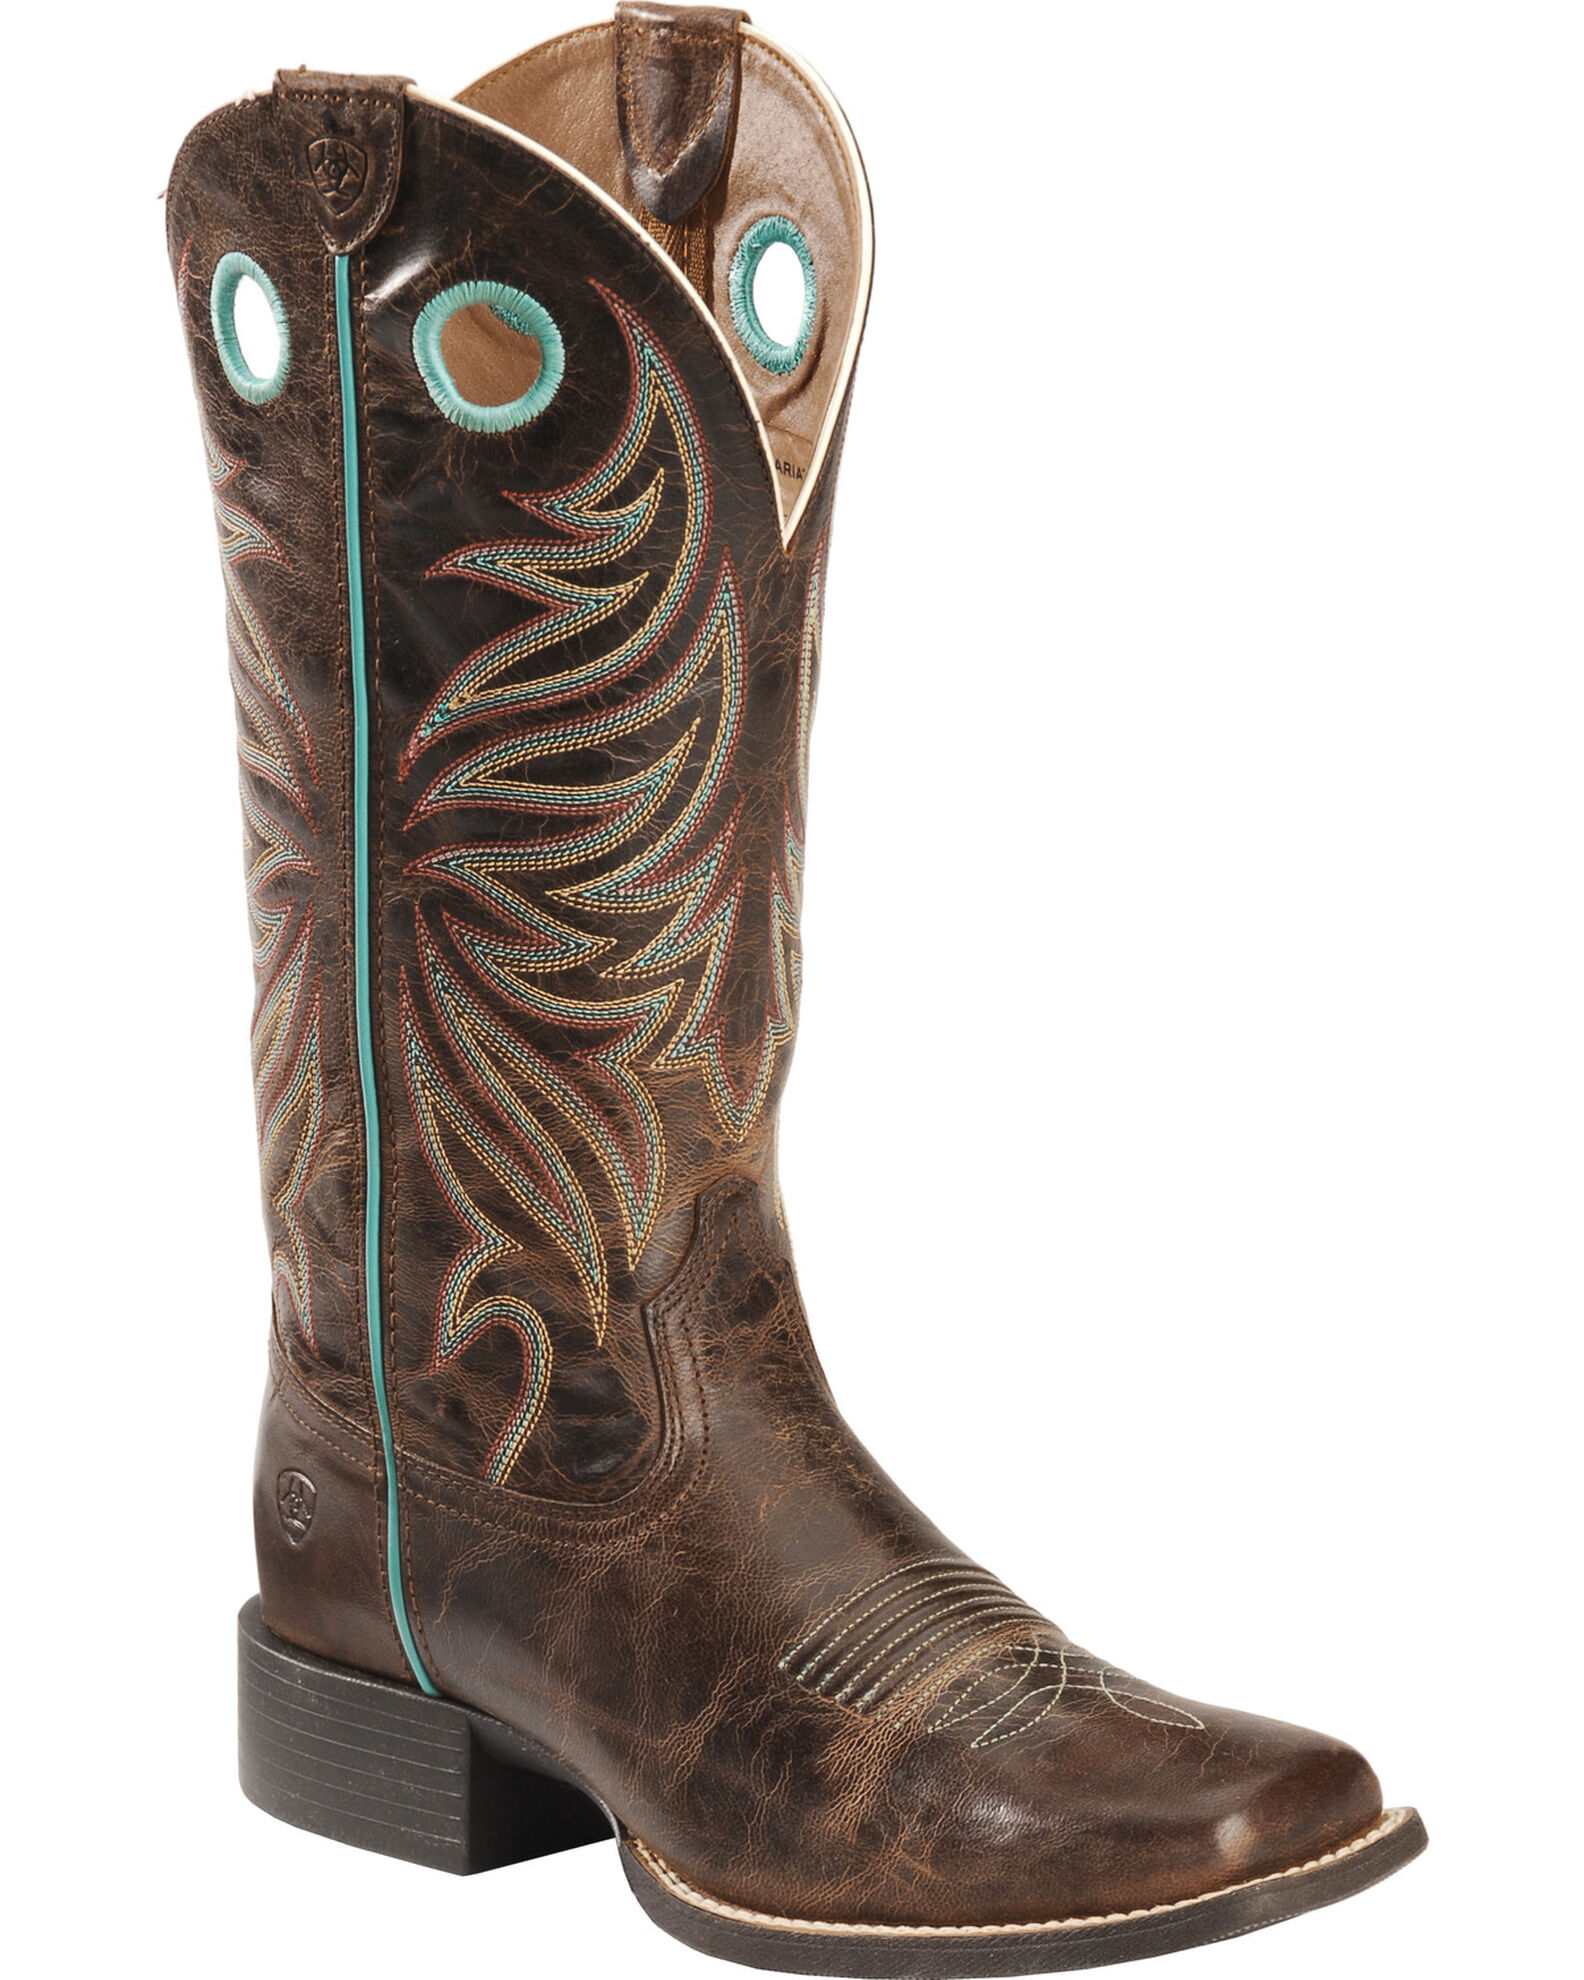 A roundup of the best cowboy boots to buy this winter 2023